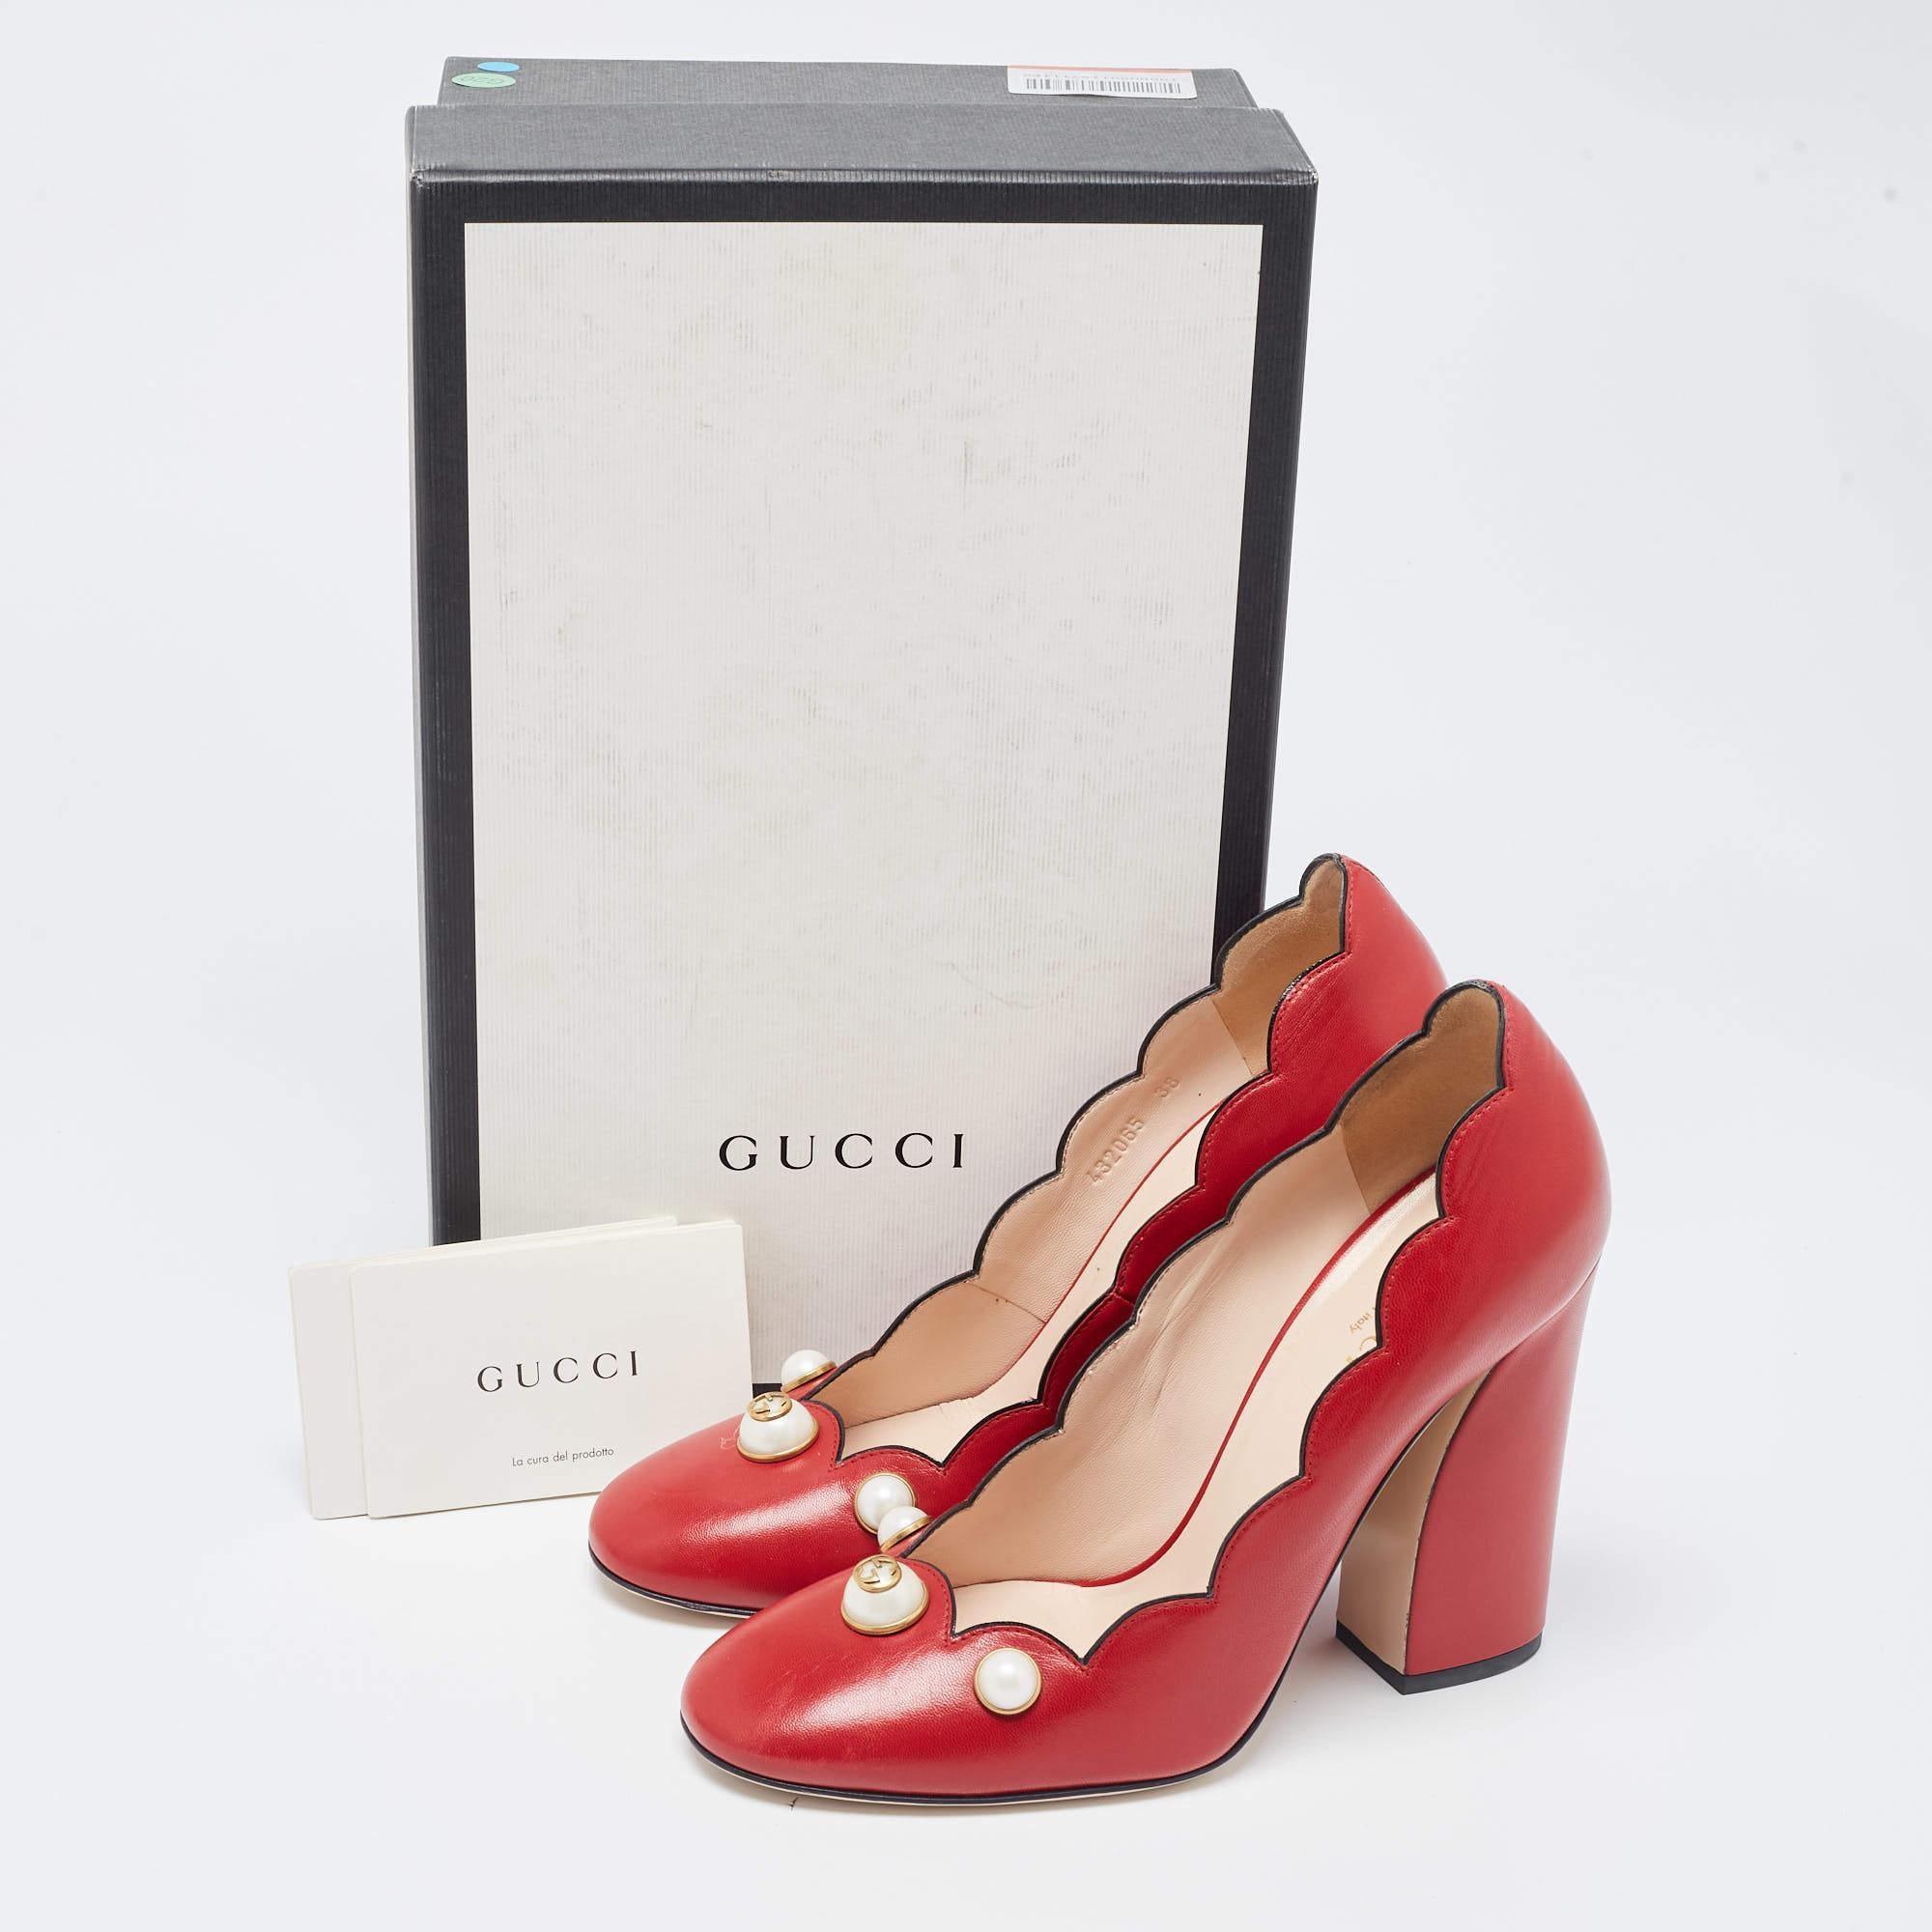 Gucci Red Leather Scalloped Willow Pearl Embellished Block Heel Pumps Size 38 5